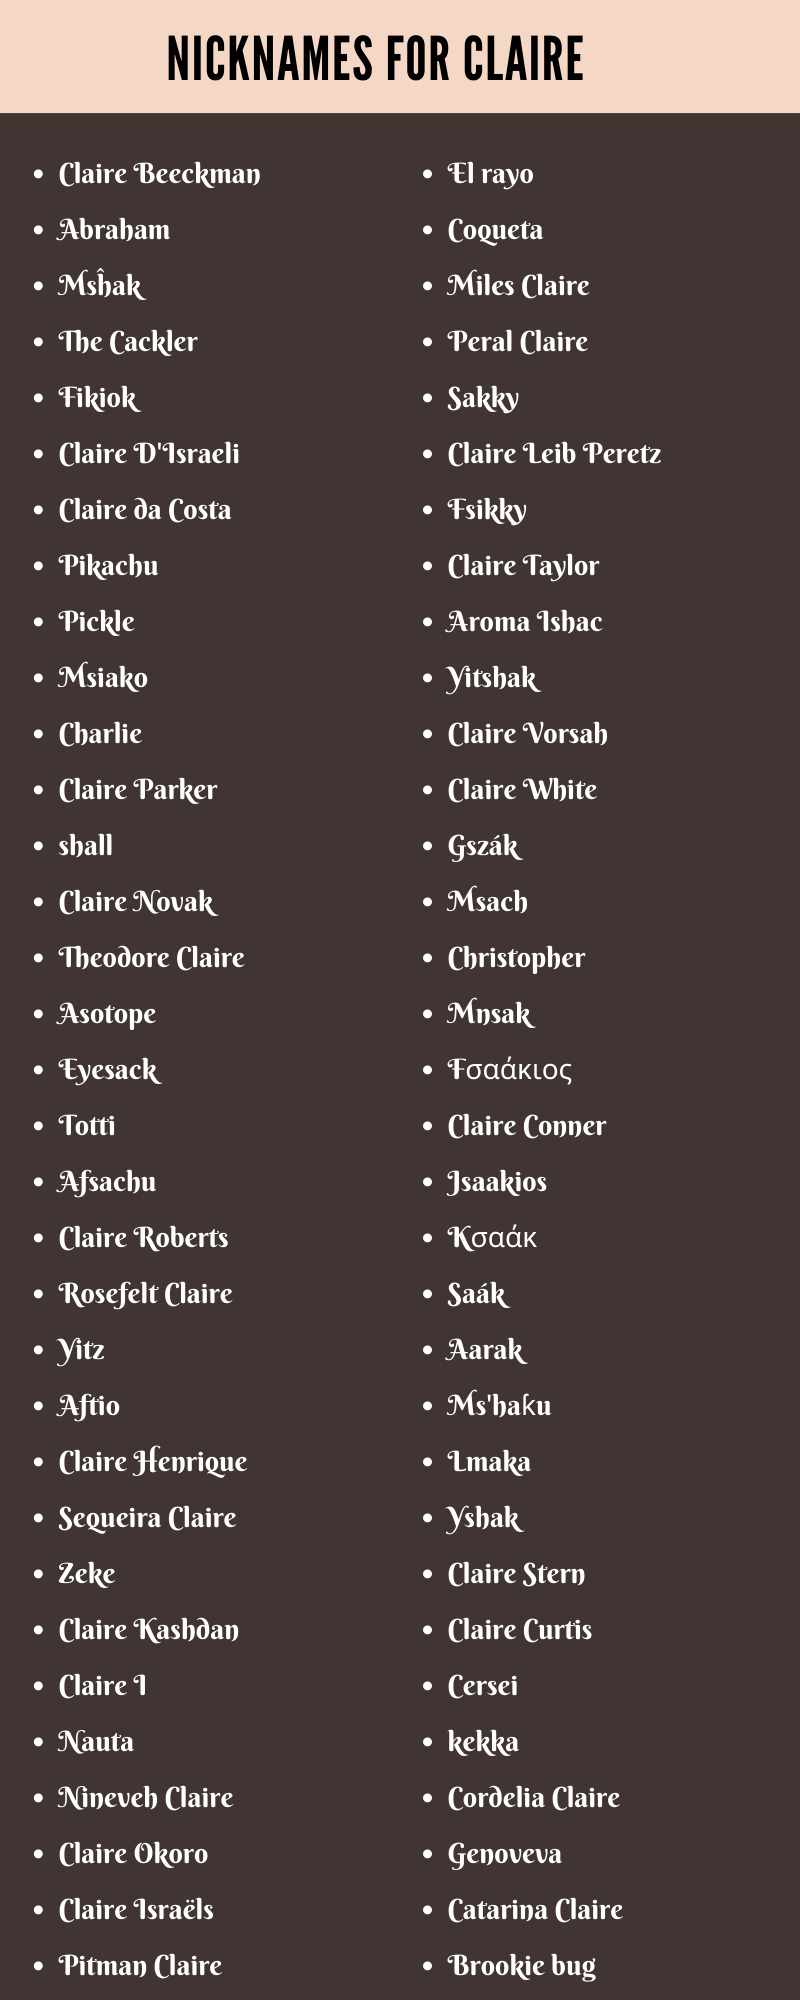 Nicknames For Claire